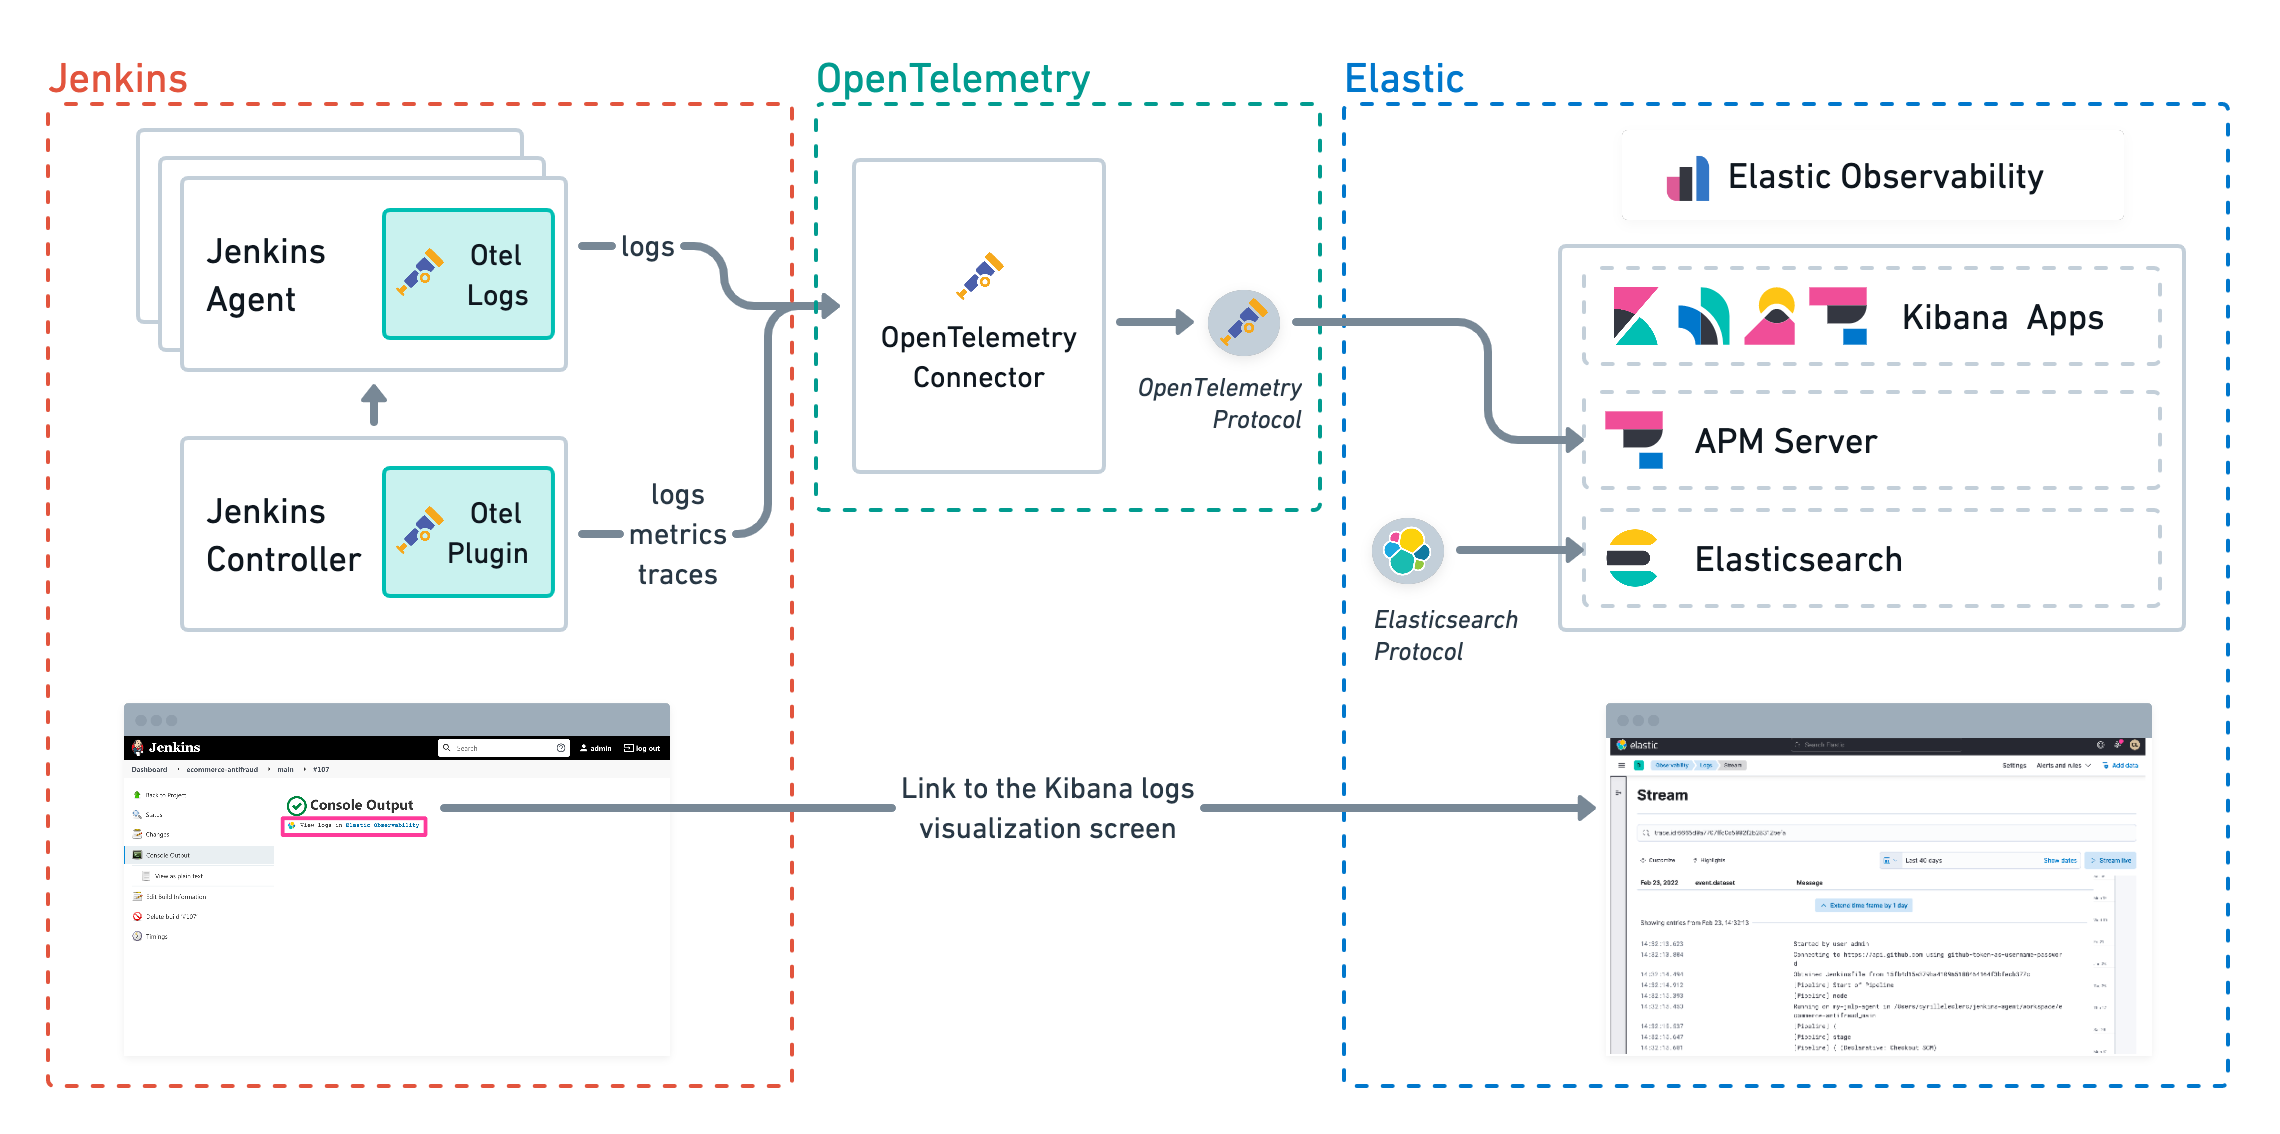 Architecture diagram for storing pipeline logs in Elastic and visualizing logs exclusively in Elastic